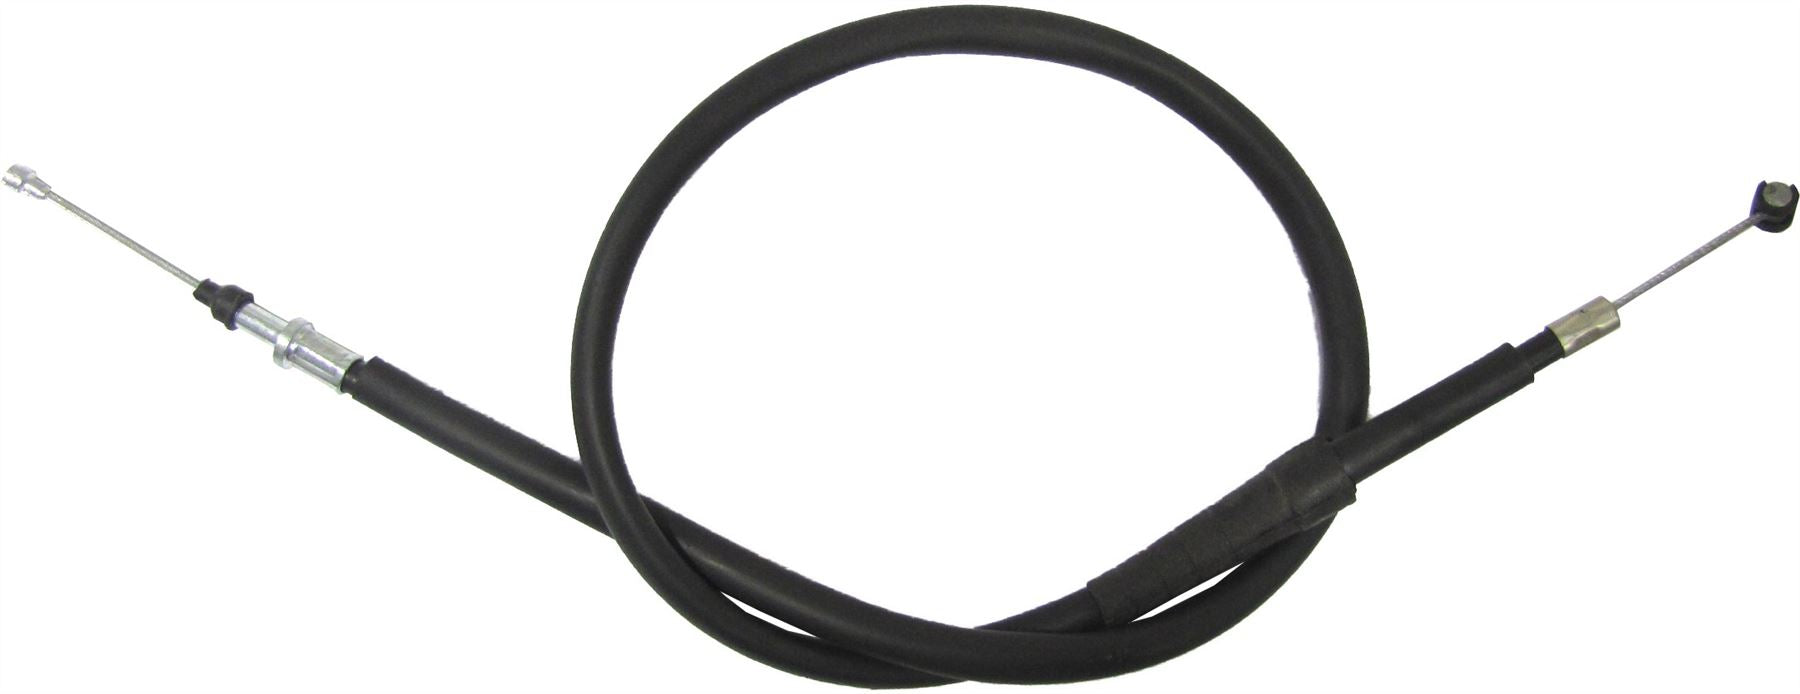 Clutch Cable Fits Yamaha XV 750 1981-1997